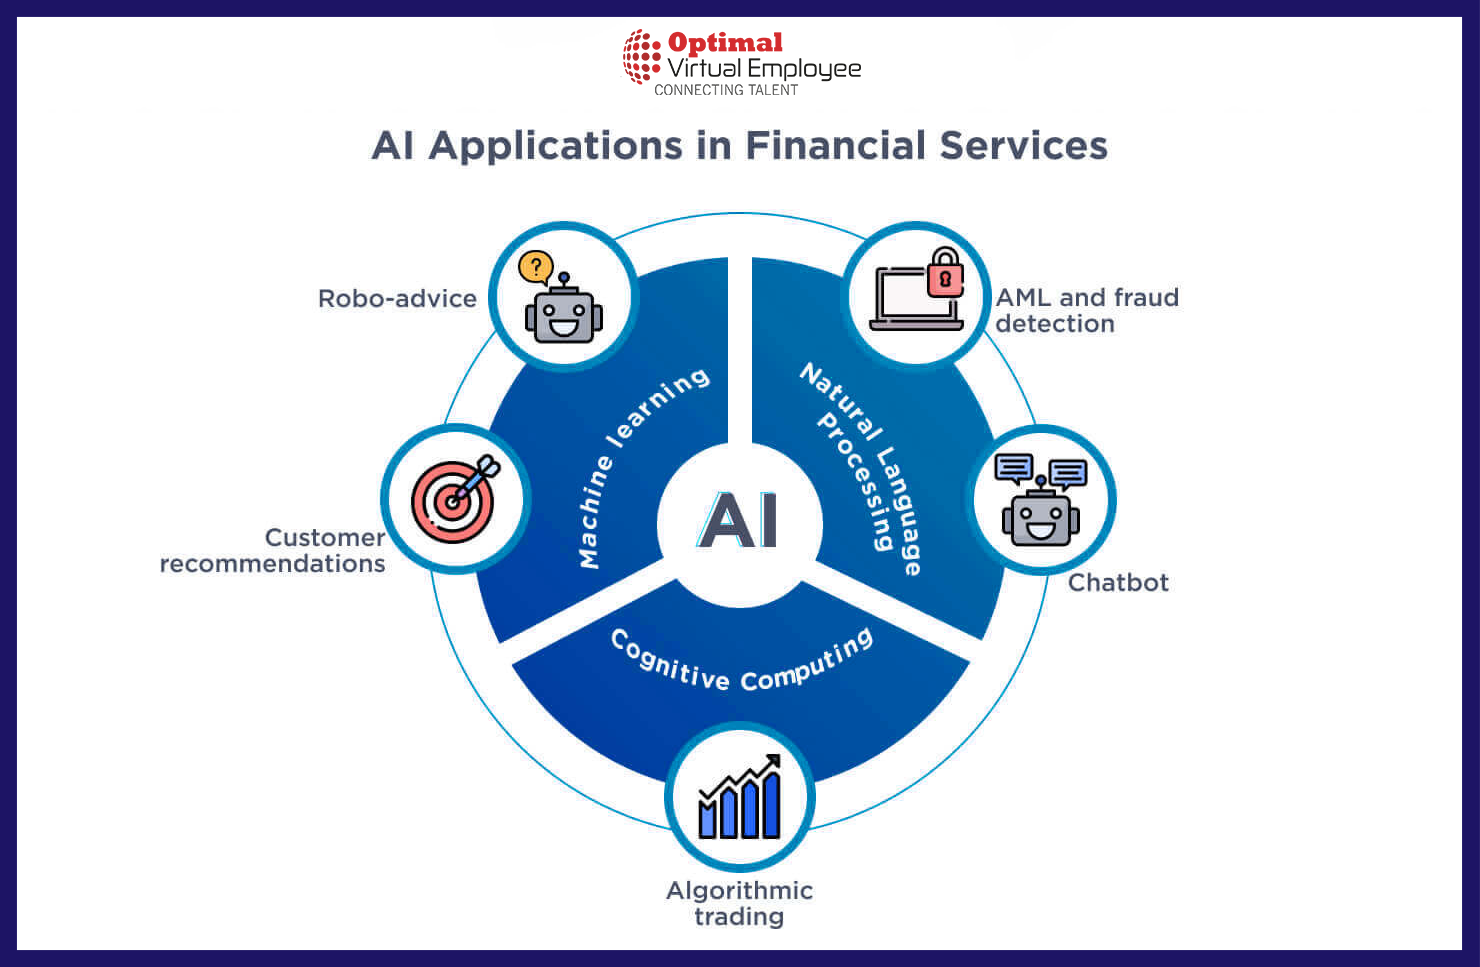 Prime Applications of Artificial Intelligence in the Finance Sector